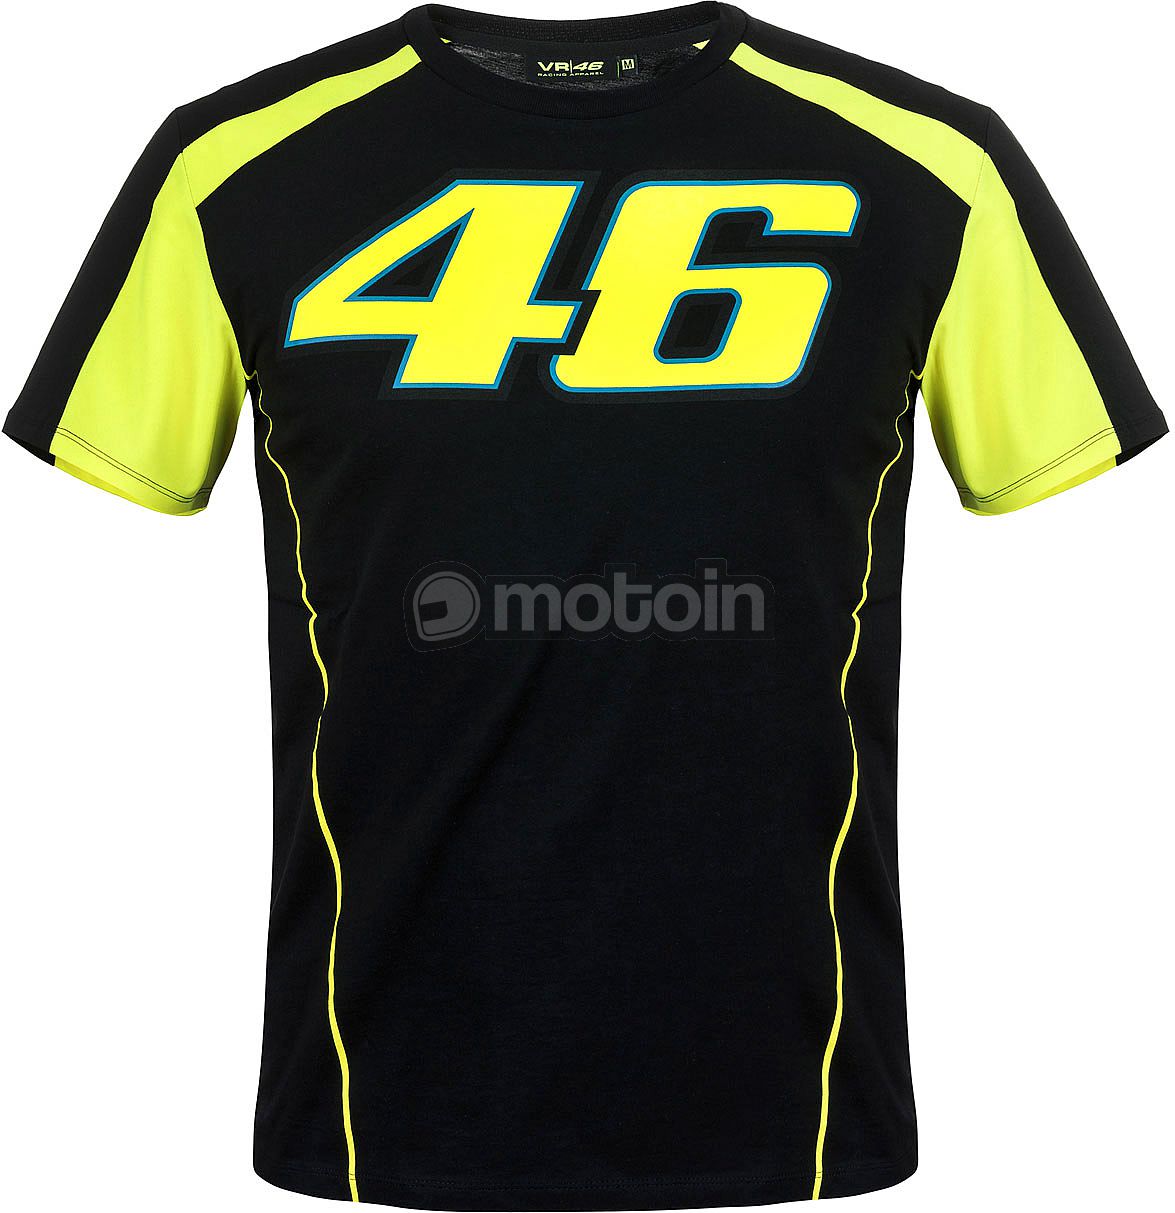 VR46 Racing Apparel Classic 46 The Doctor, T-shirt